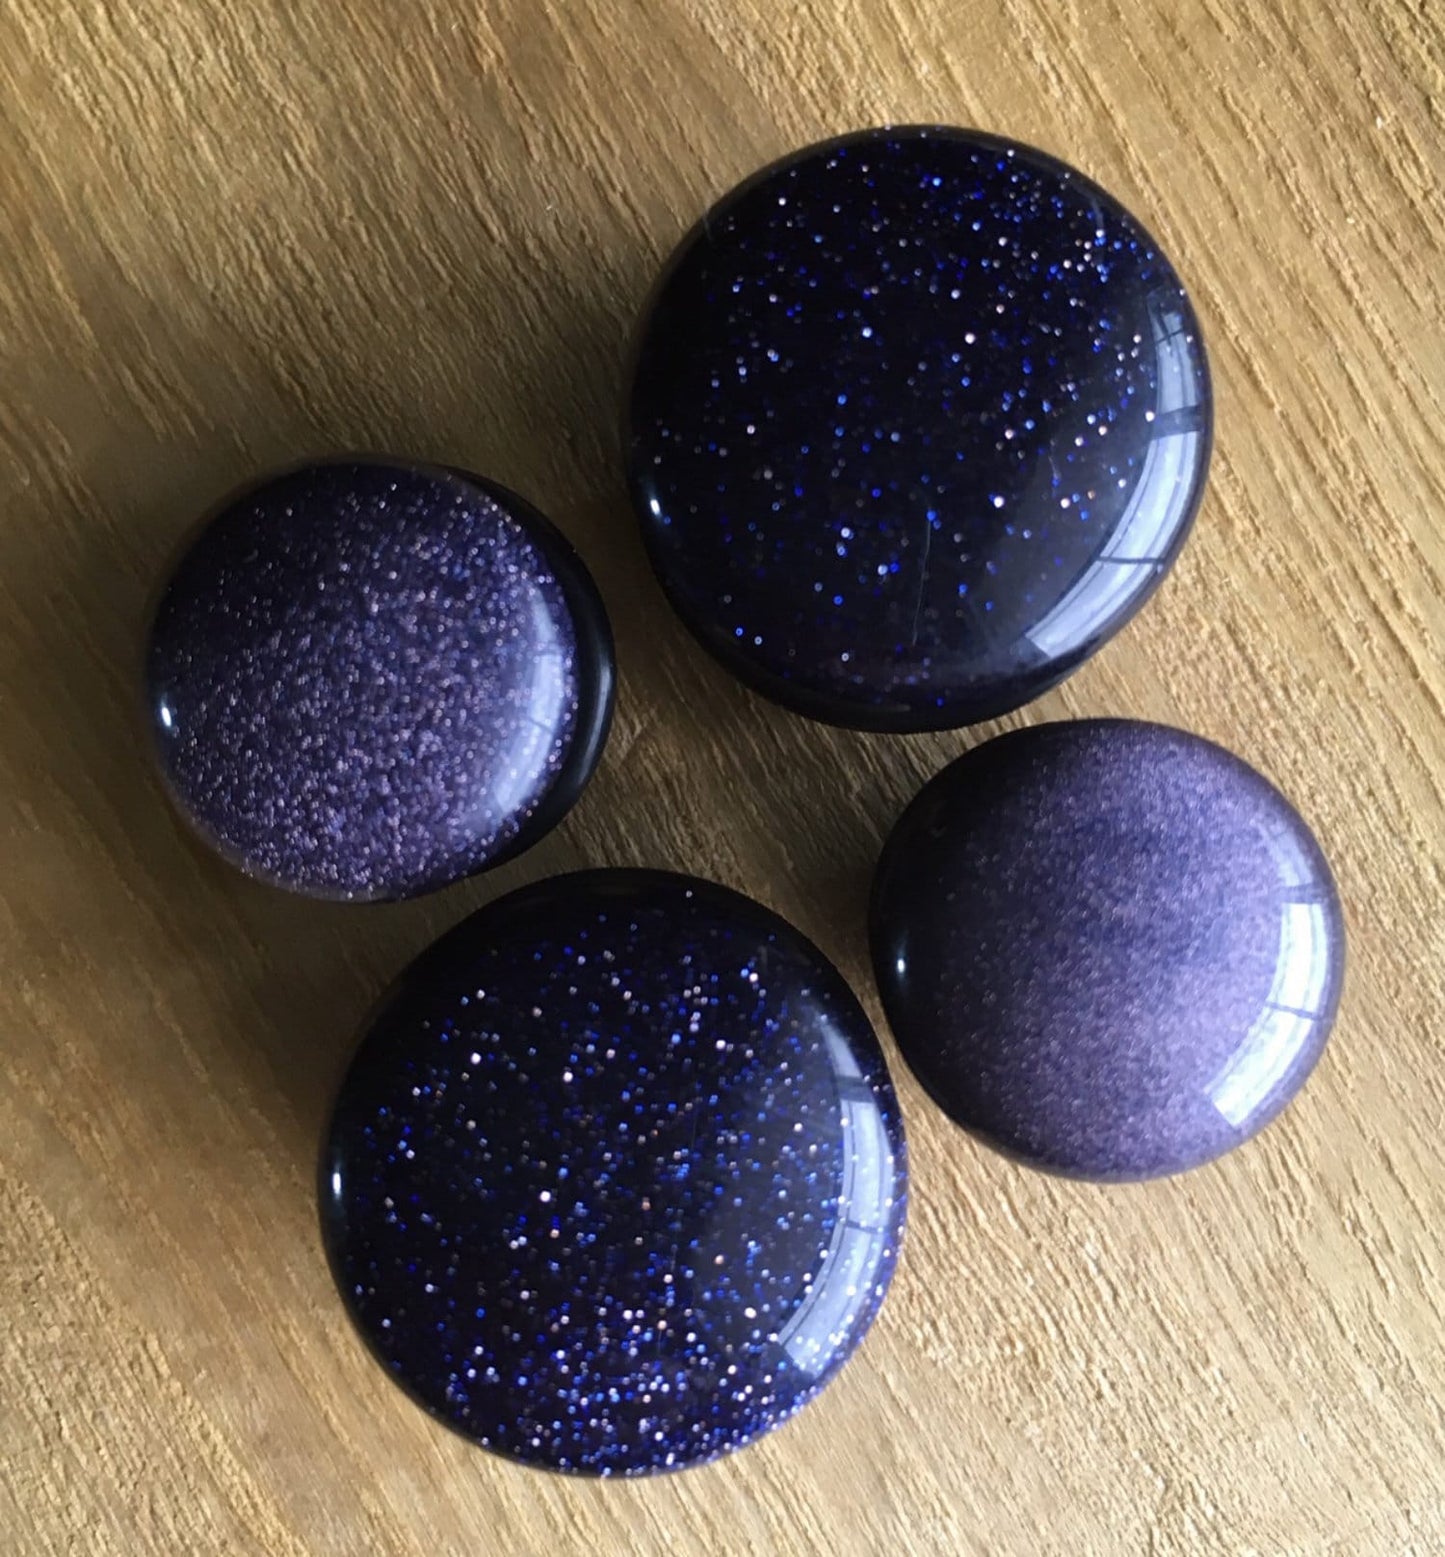 PAIR of Stunning Midnight Blue Sandstone Single Flare Stone Plugs with O-Rings - Gauges 4g (5mm) up to 5/8" (16mm) available!